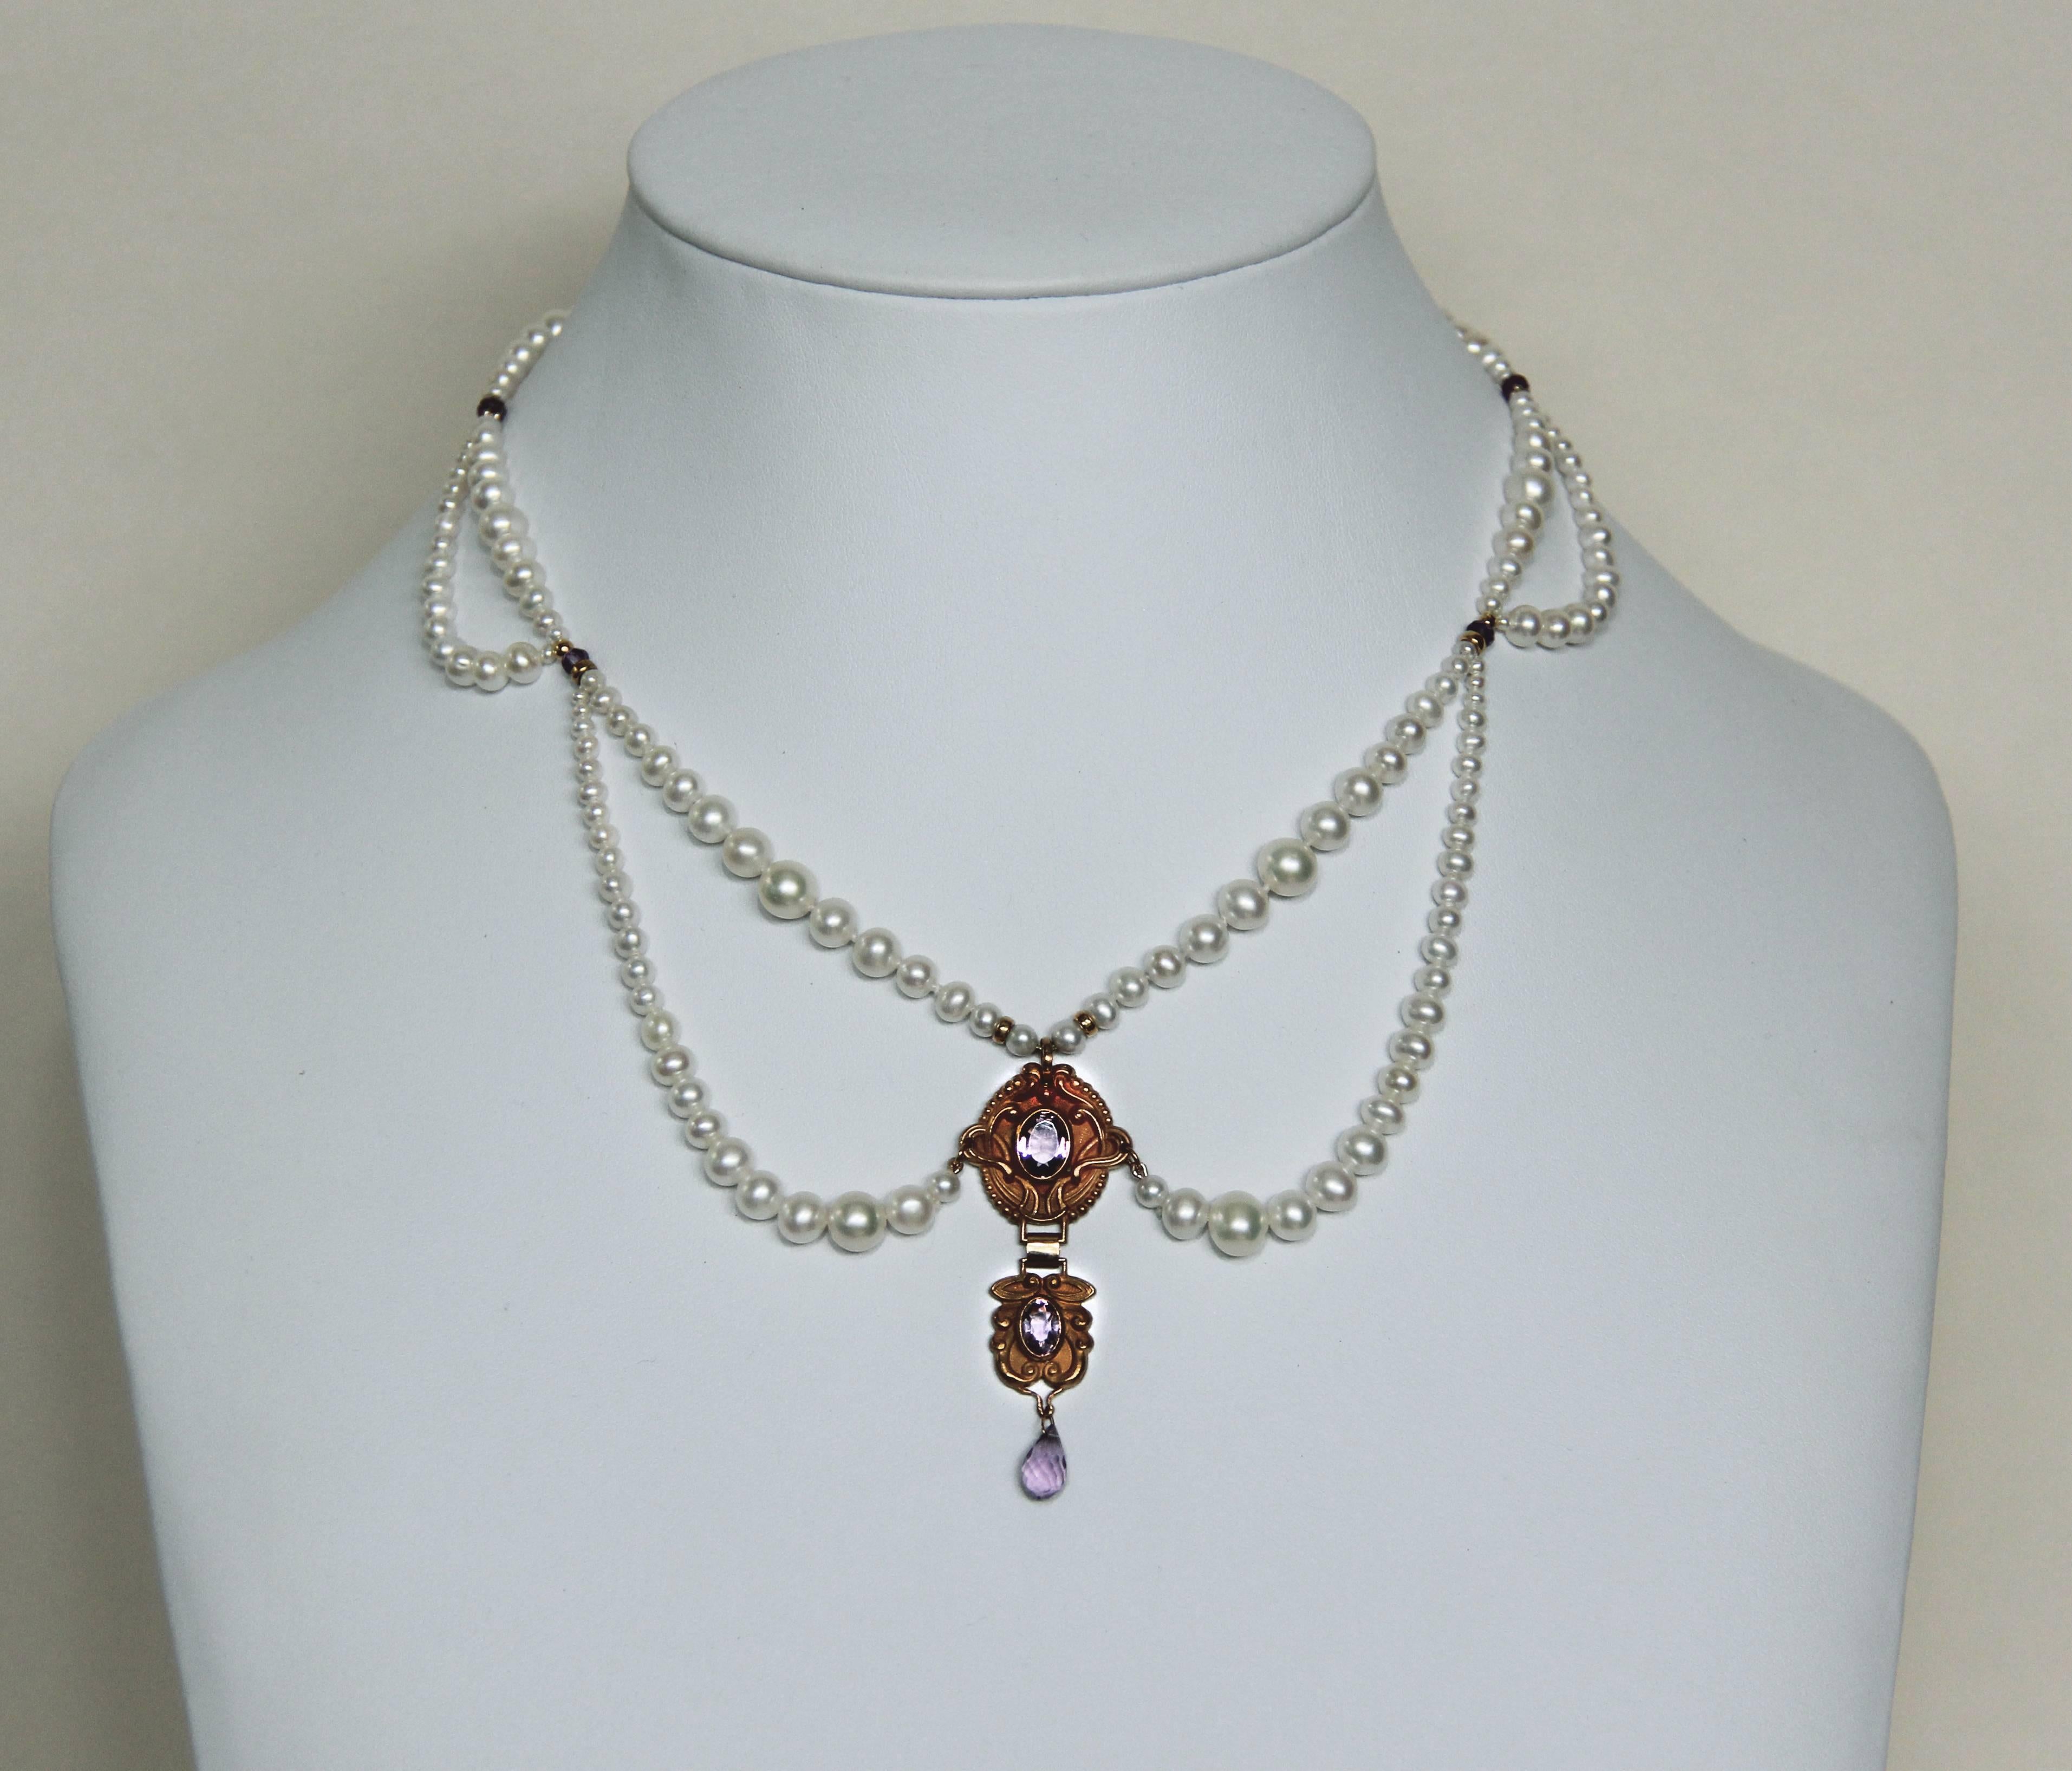 Victorian Marina J Graduated Pearl Necklace with Vintage Amethyst Double Pendant